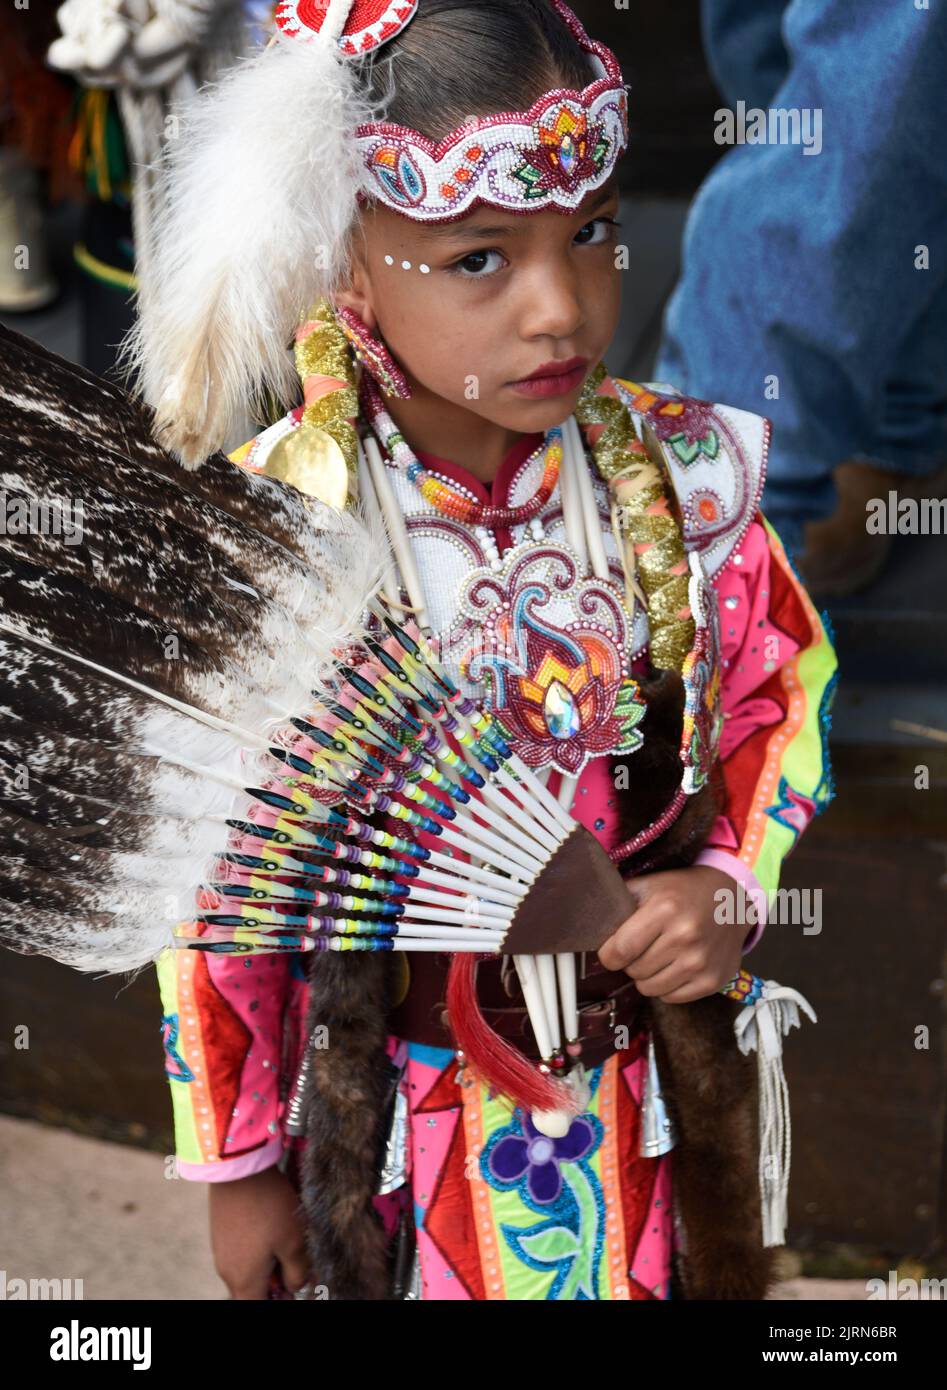 A young Native American girls prepares to compete in the Native ...